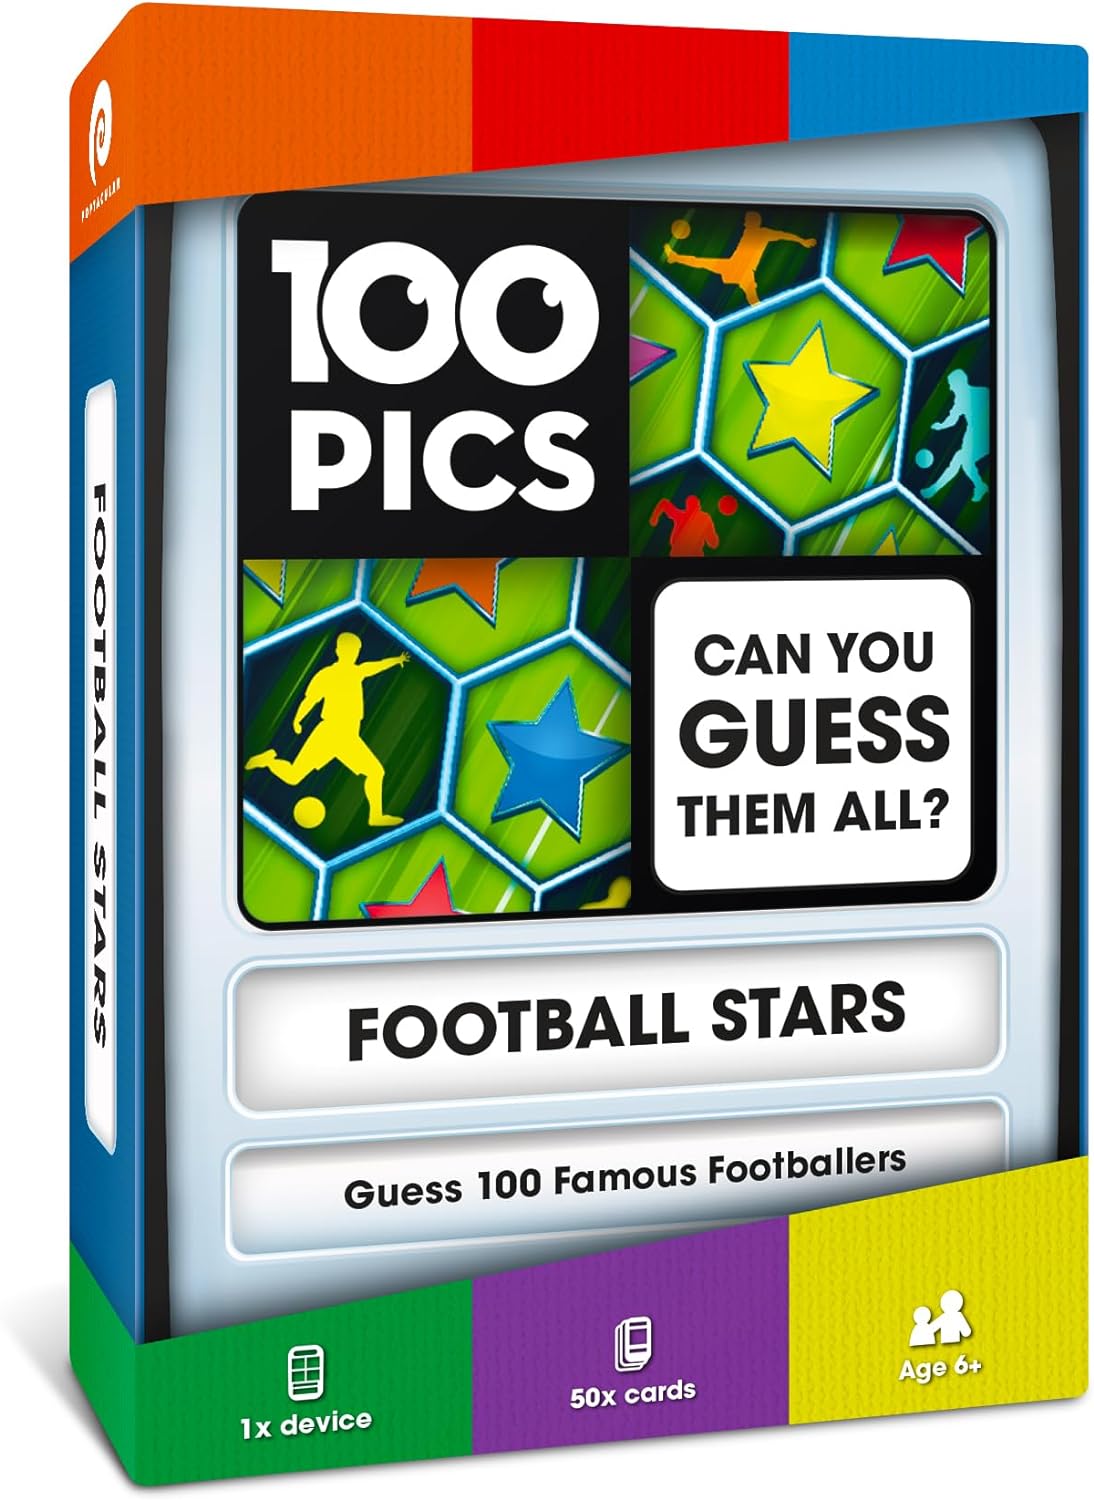 100 PICS Football Stars Travel Game - Guess 100 Players | Flash Cards with Slide Reveal Case | Quiz Card Game, Gift, Stocking Filler | For Kids and Adults | Ages 6+